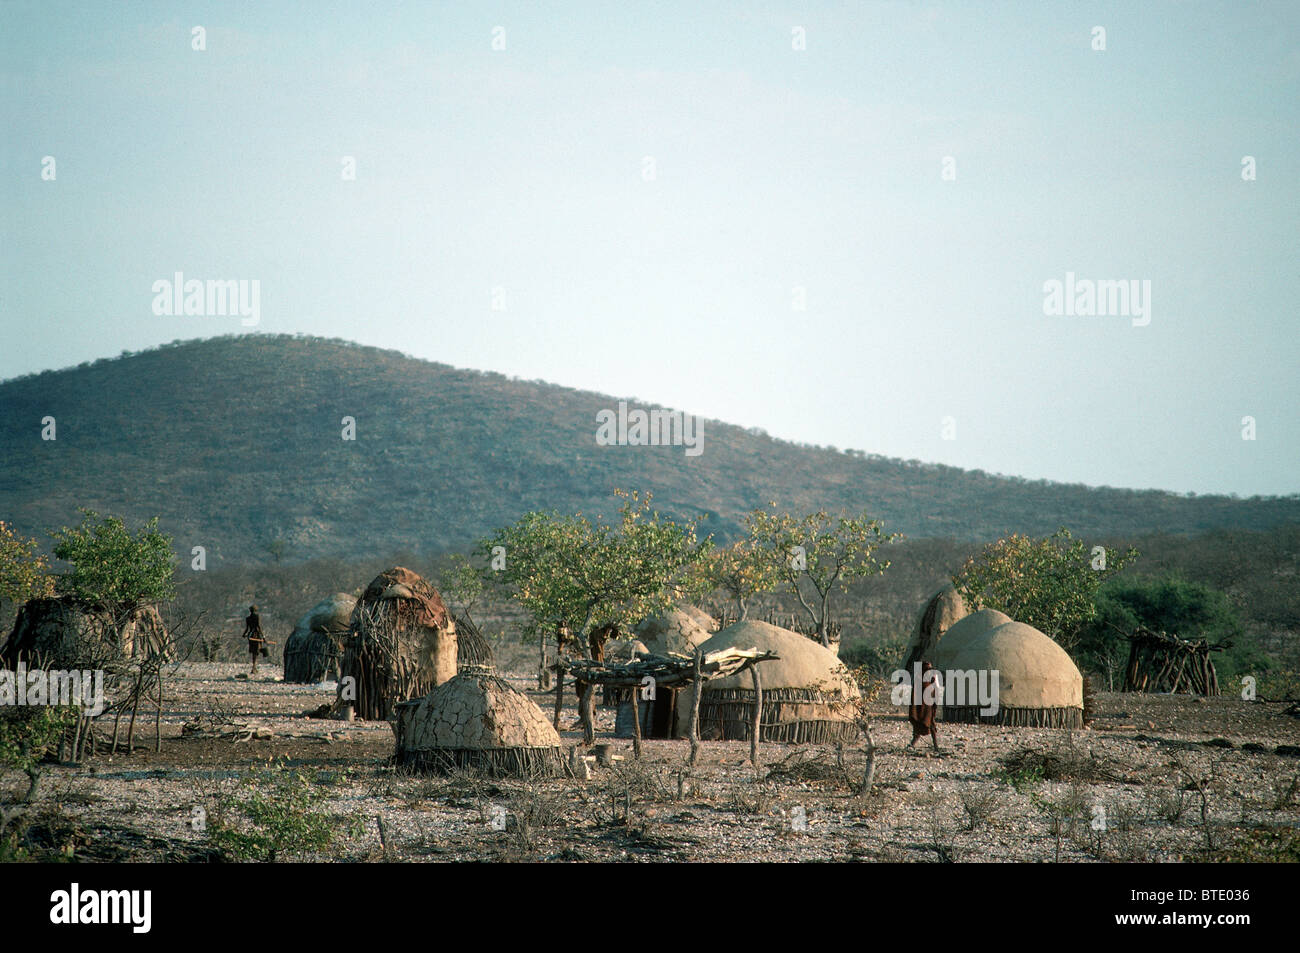 Himba village with a cluster of traditional rounded huts Stock Photo